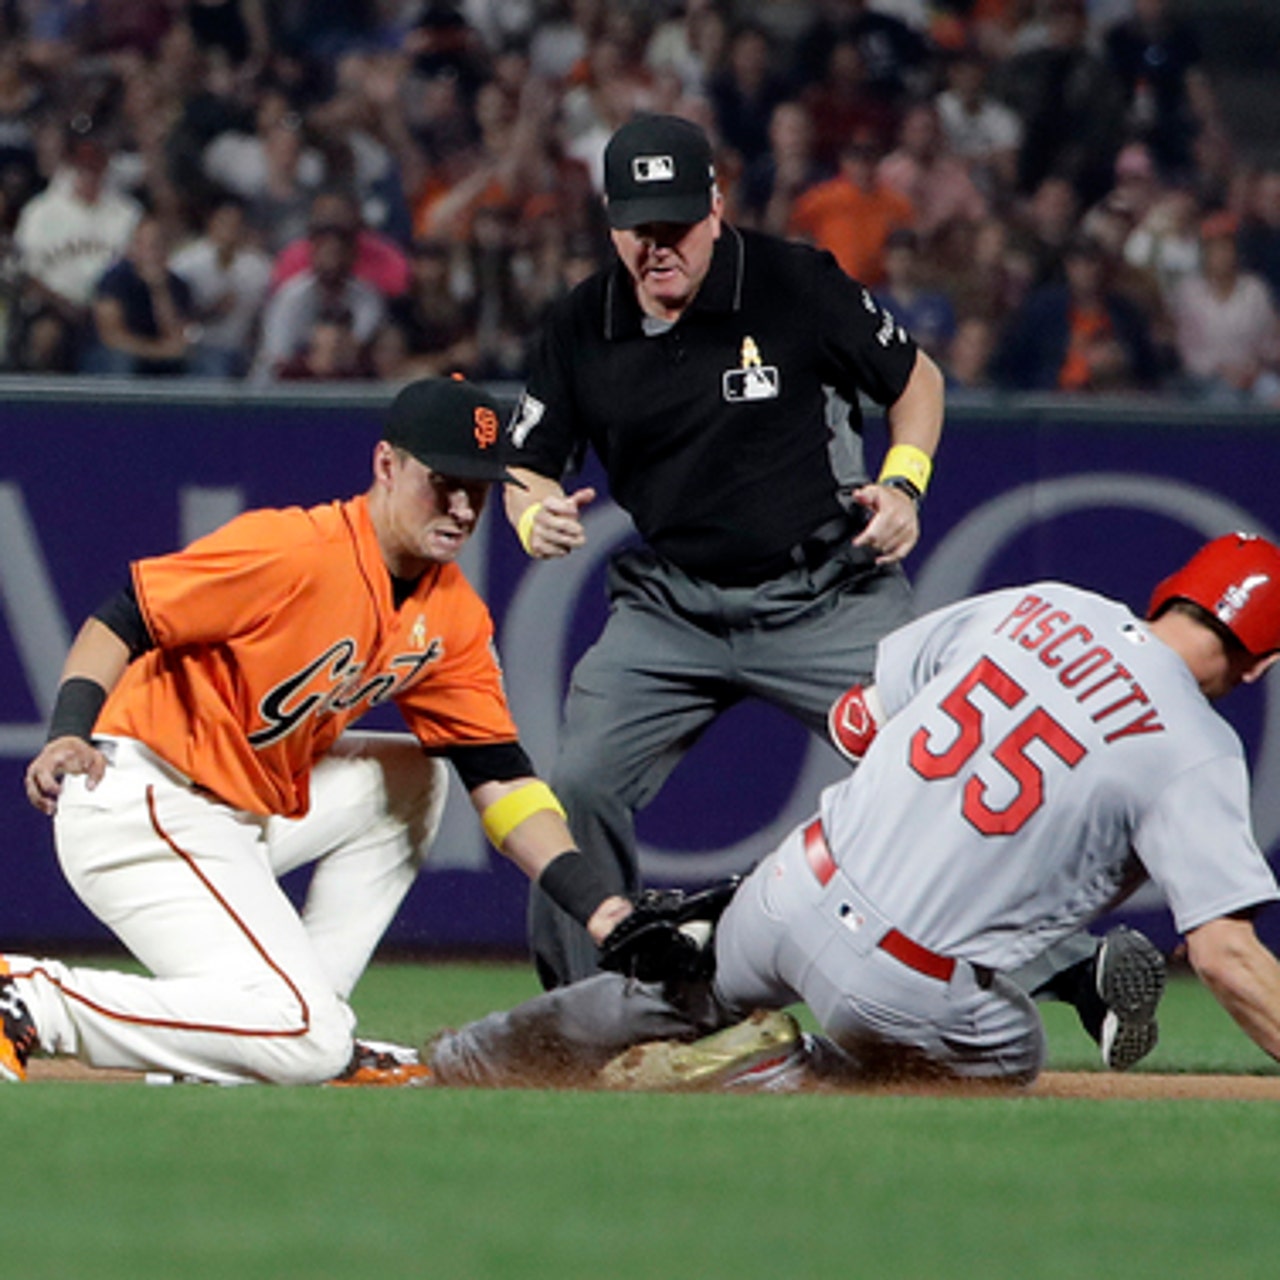 Kelby Tomlinson lines game-winning single as Giants beat Cardinals